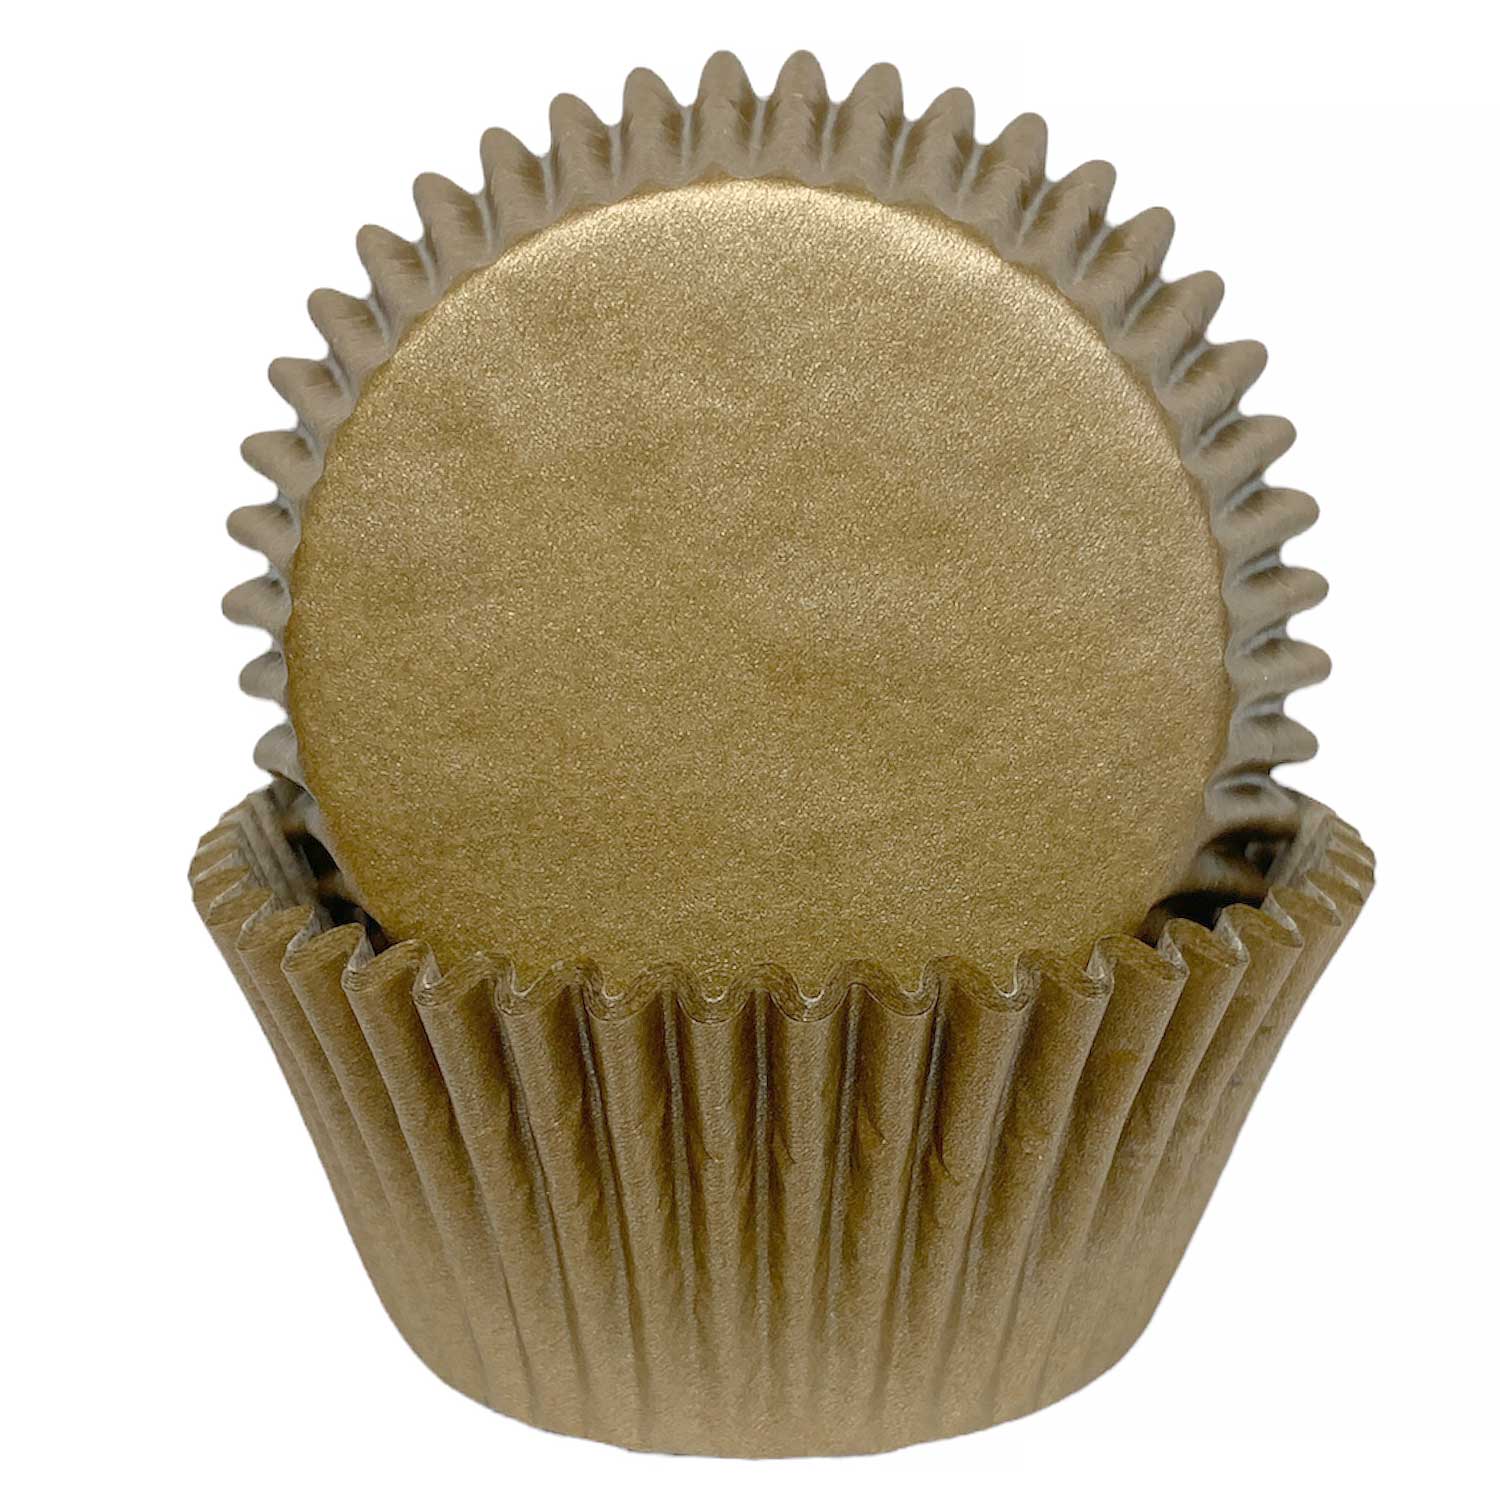 Solid Gold Cupcake Liners